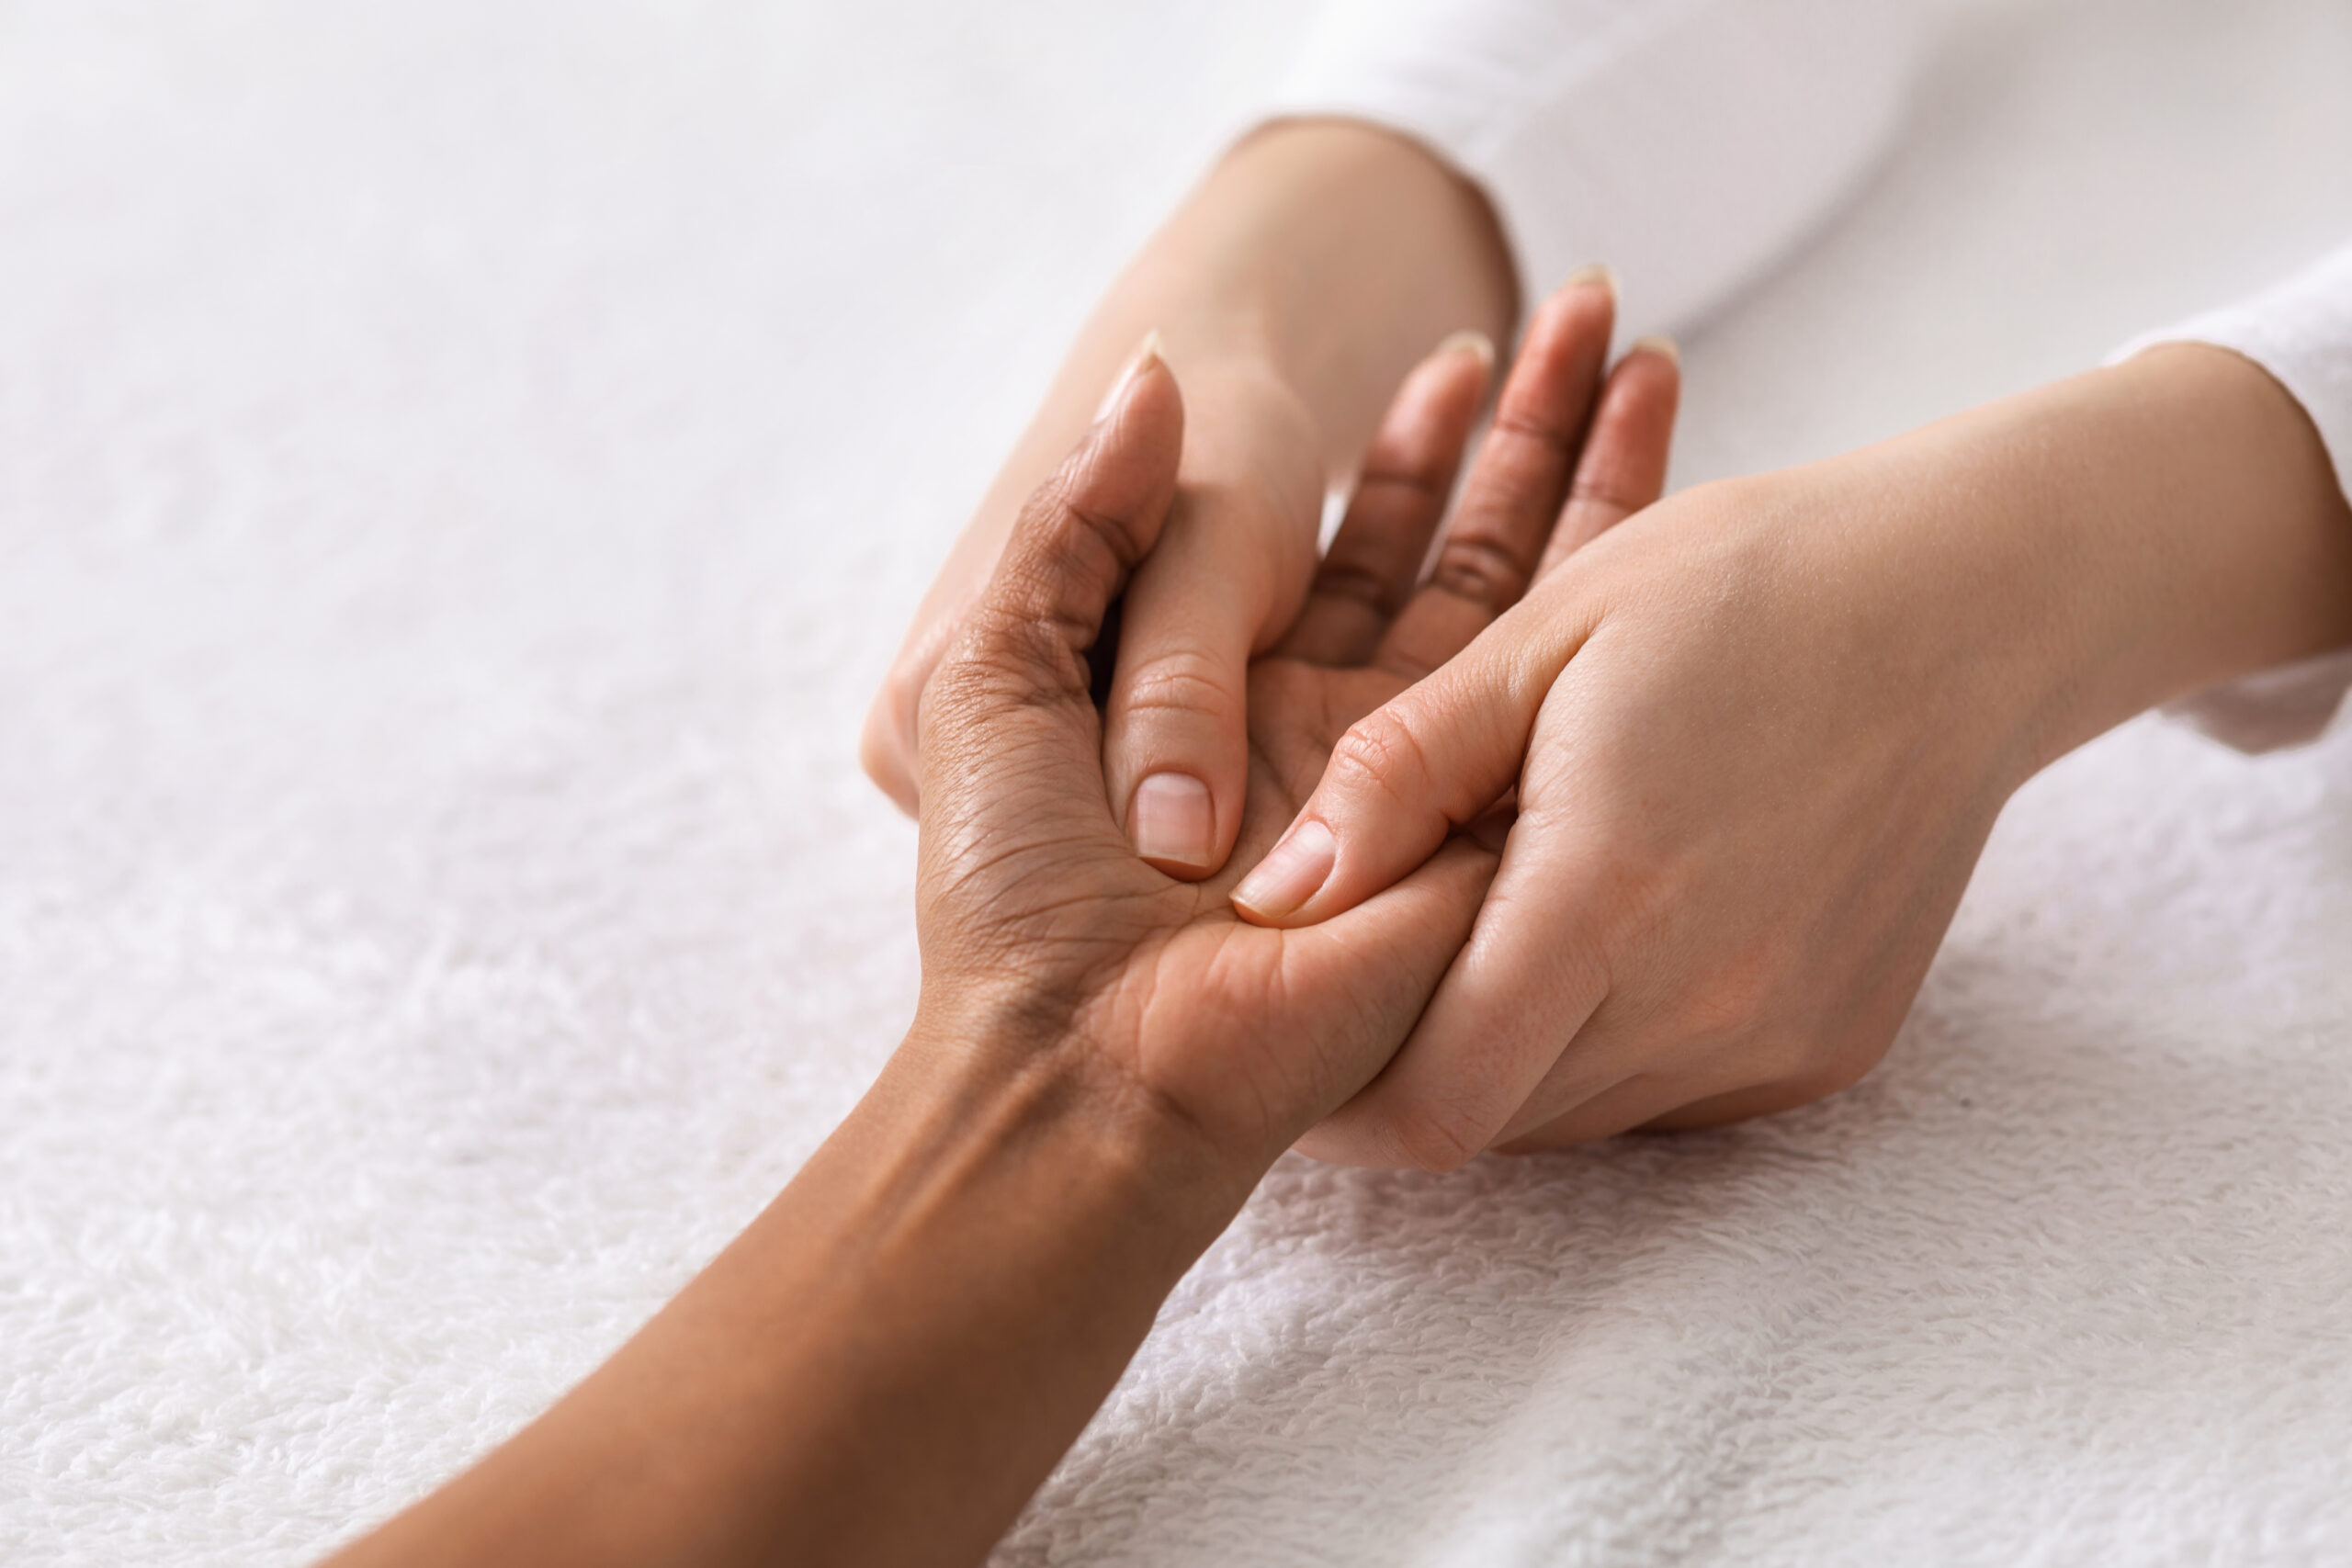 https://elements.envato.com/acupuncture-hand-massage-for-black-woman-at-spa-MJFHRBL